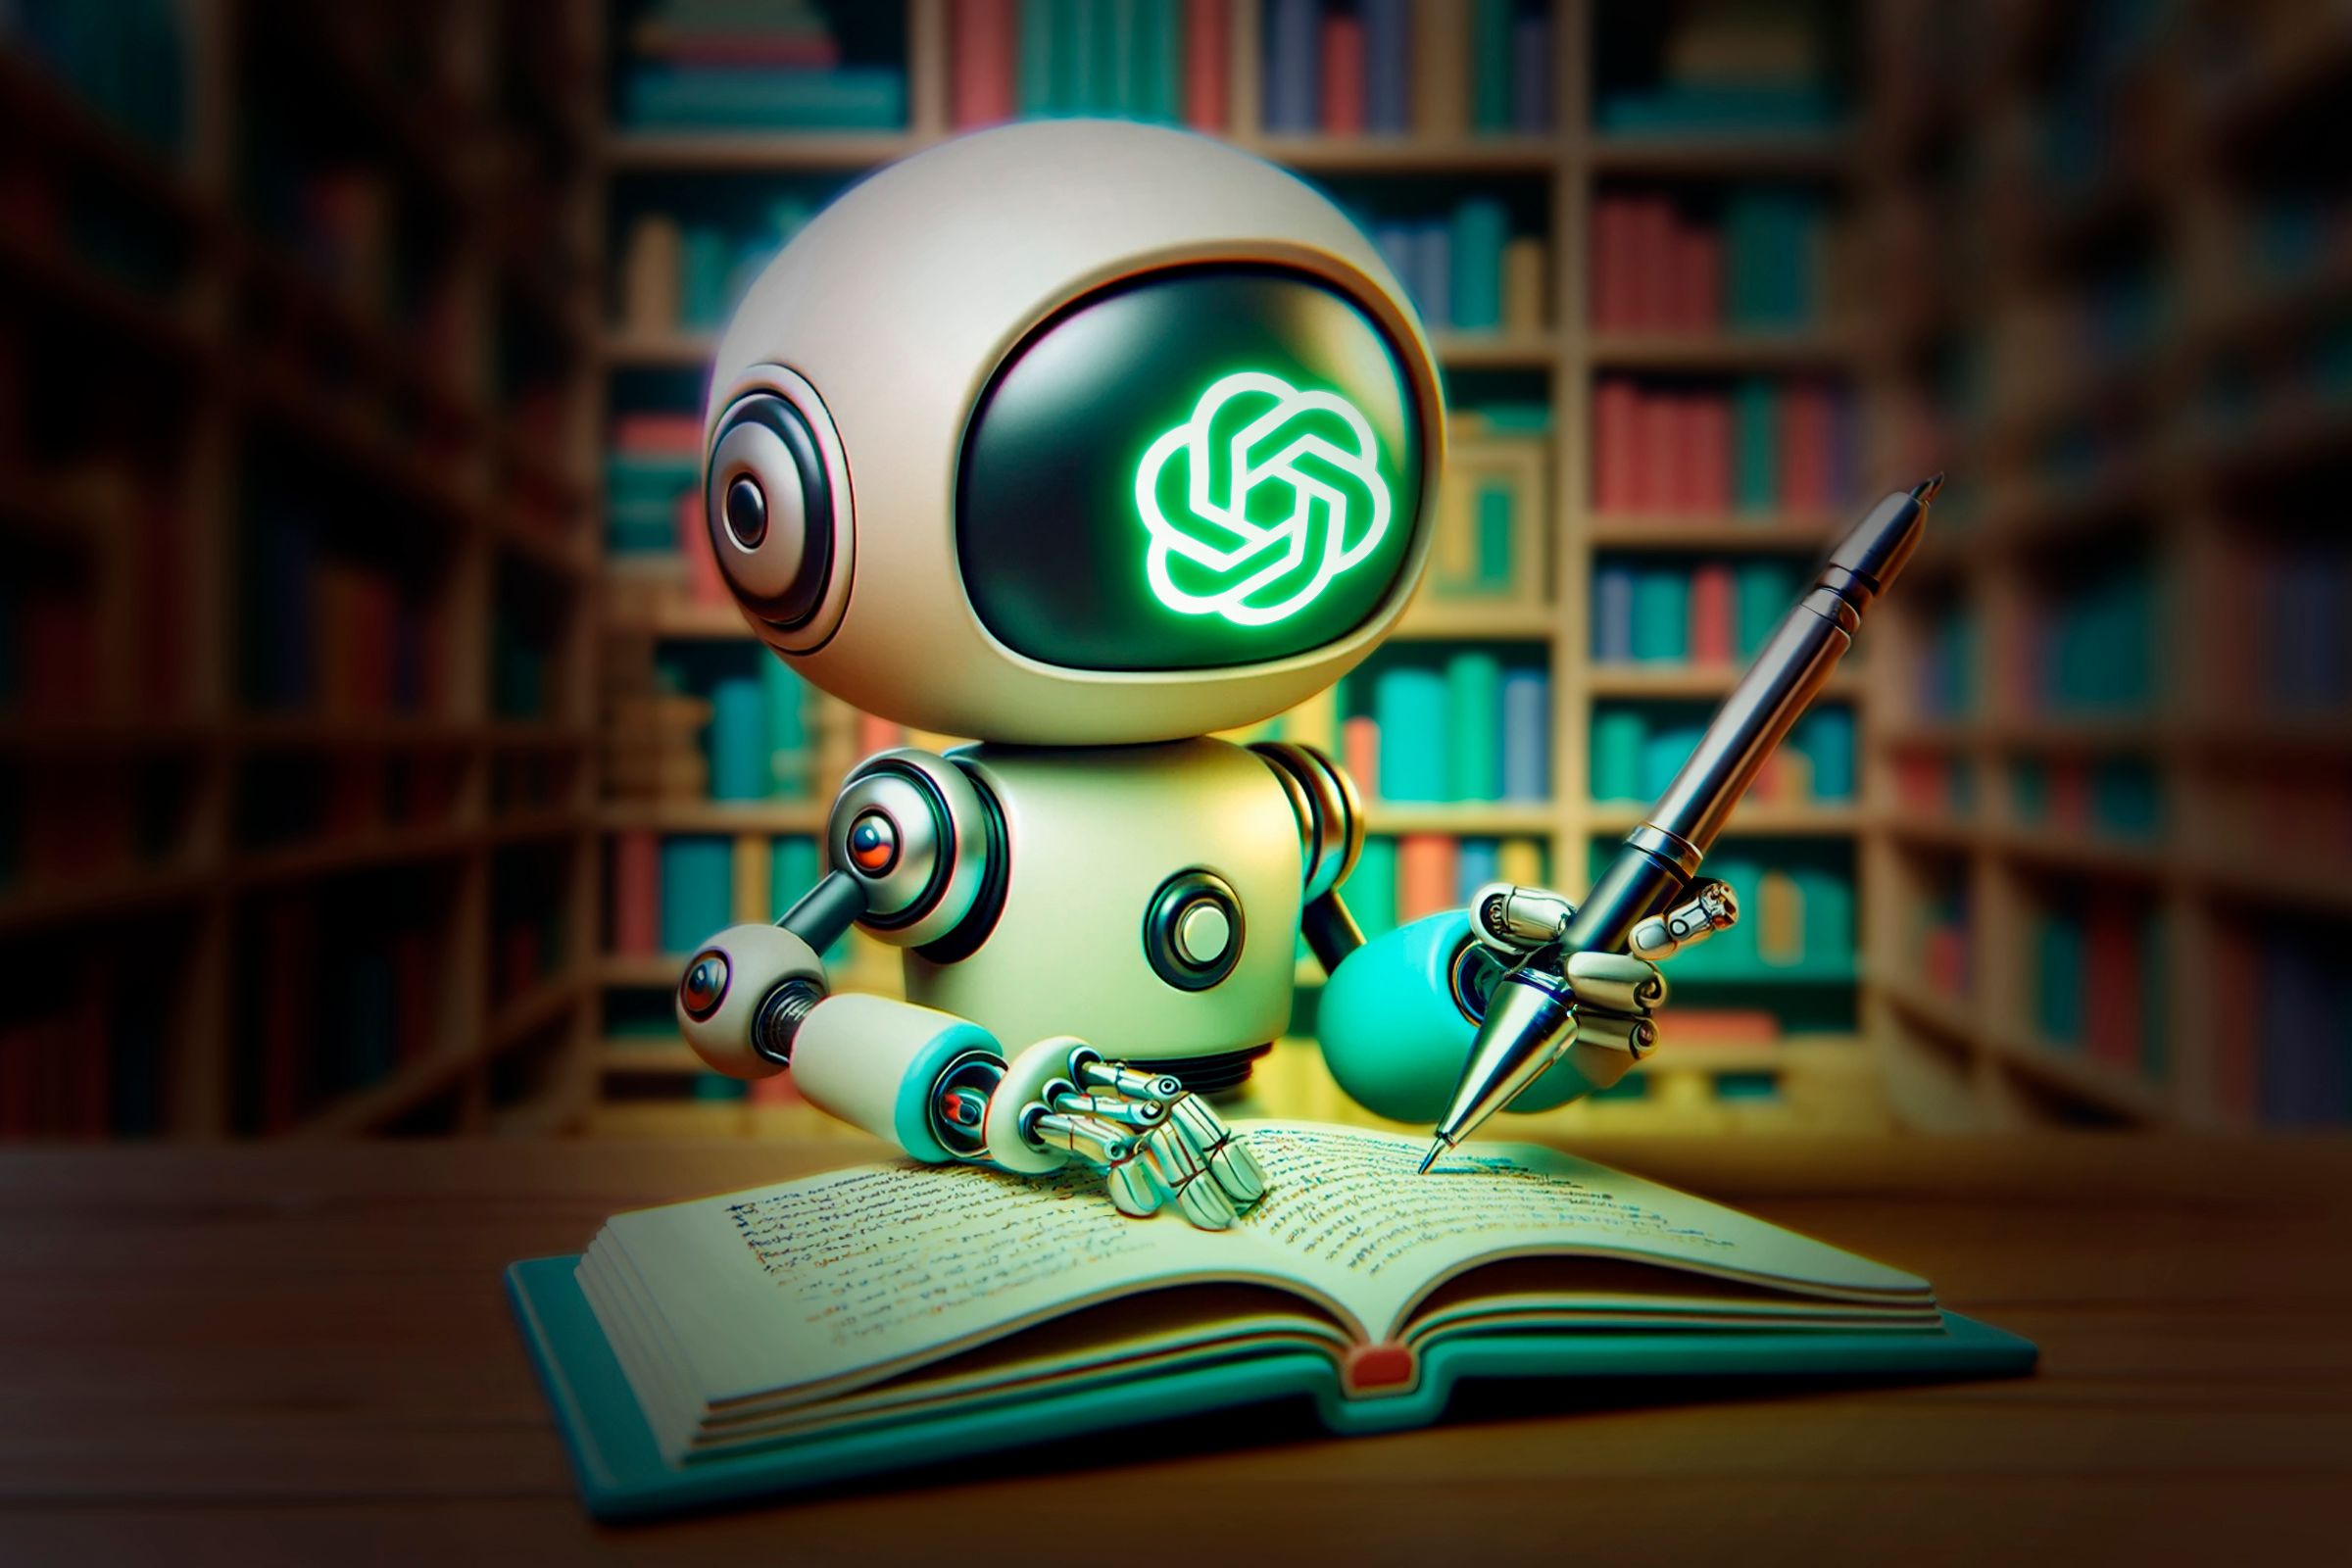 A robot in a library writing a book and the ChatGPT logo on its face.